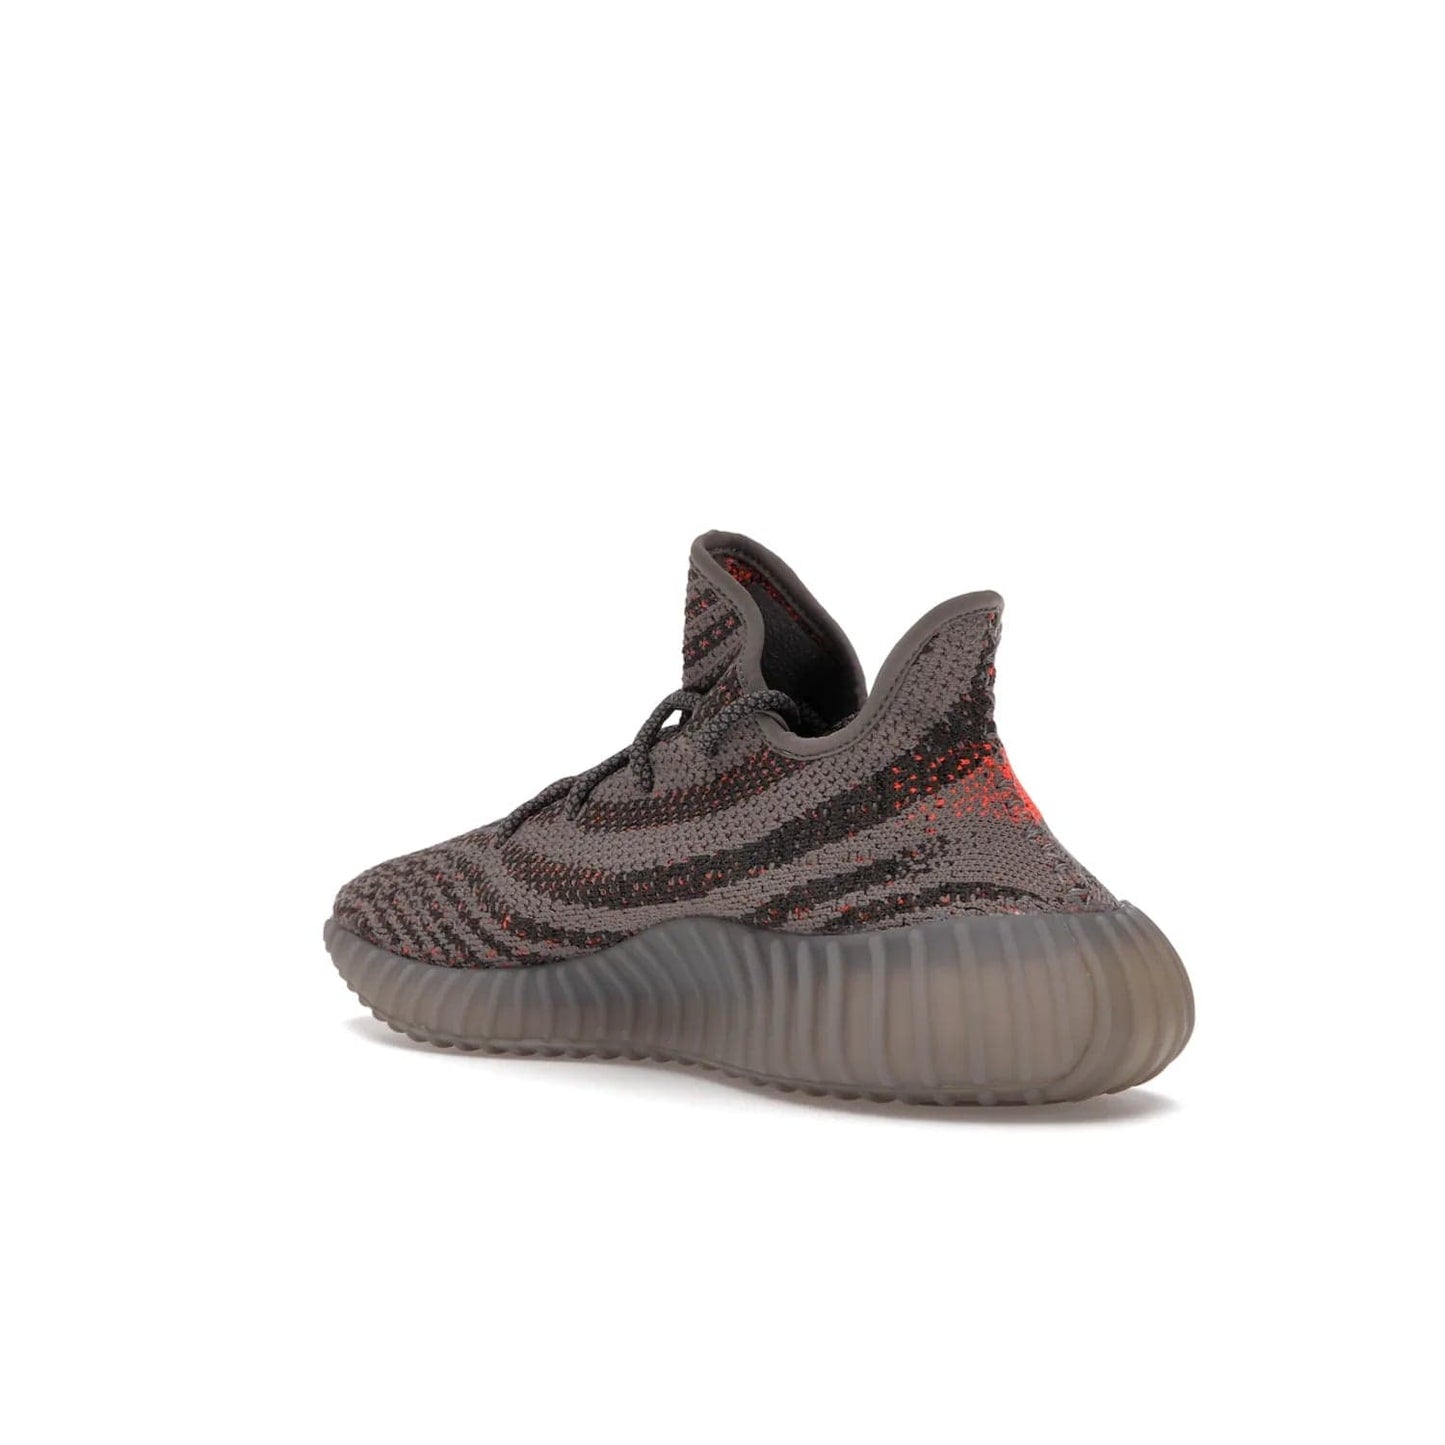 adidas Yeezy Boost 350 V2 Beluga Reflective - Image 24 - Only at www.BallersClubKickz.com - Shop the adidas Yeezy Boost 350 V2 Beluga Reflective: a stylish, reflective sneaker that stands out. Featuring Boost sole, Primeknit upper & signature orange stripe. Available Dec 2021.